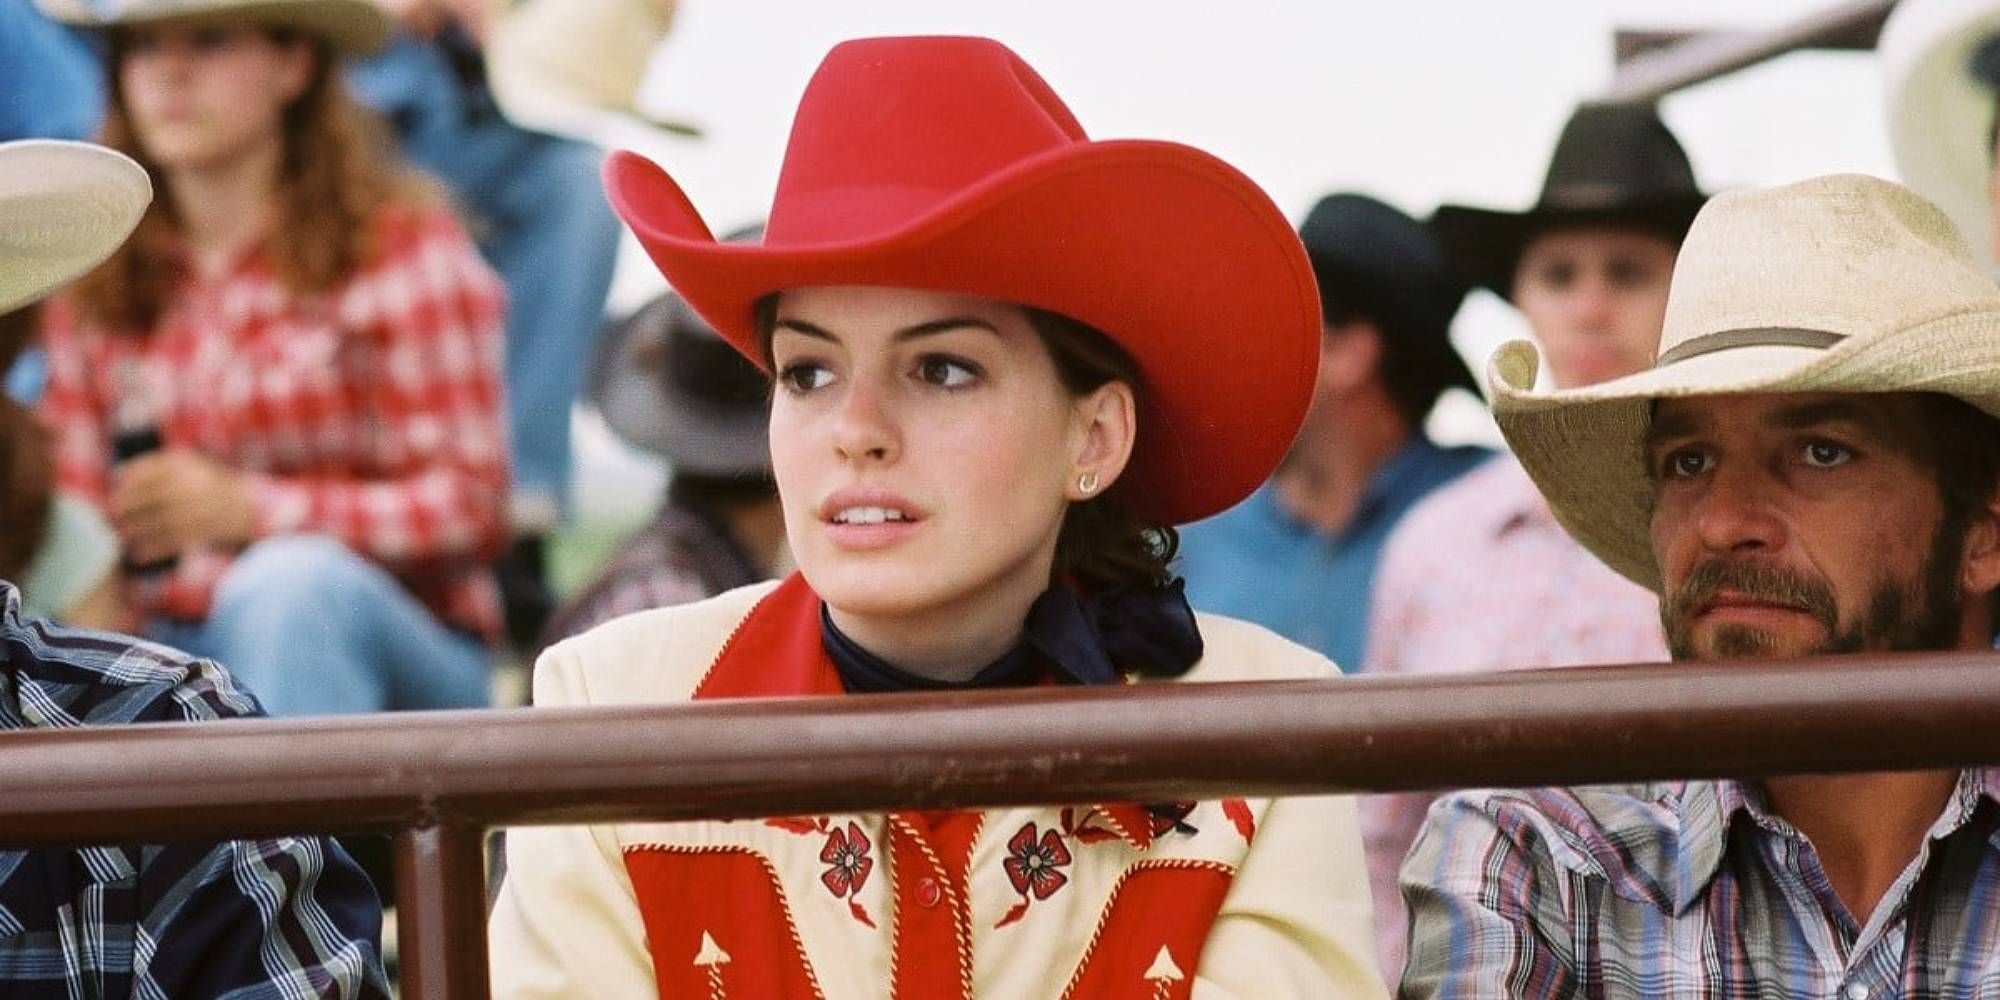 Anne Hathaway sitting with a red cowboy hat on in The Brokeback Mountain.